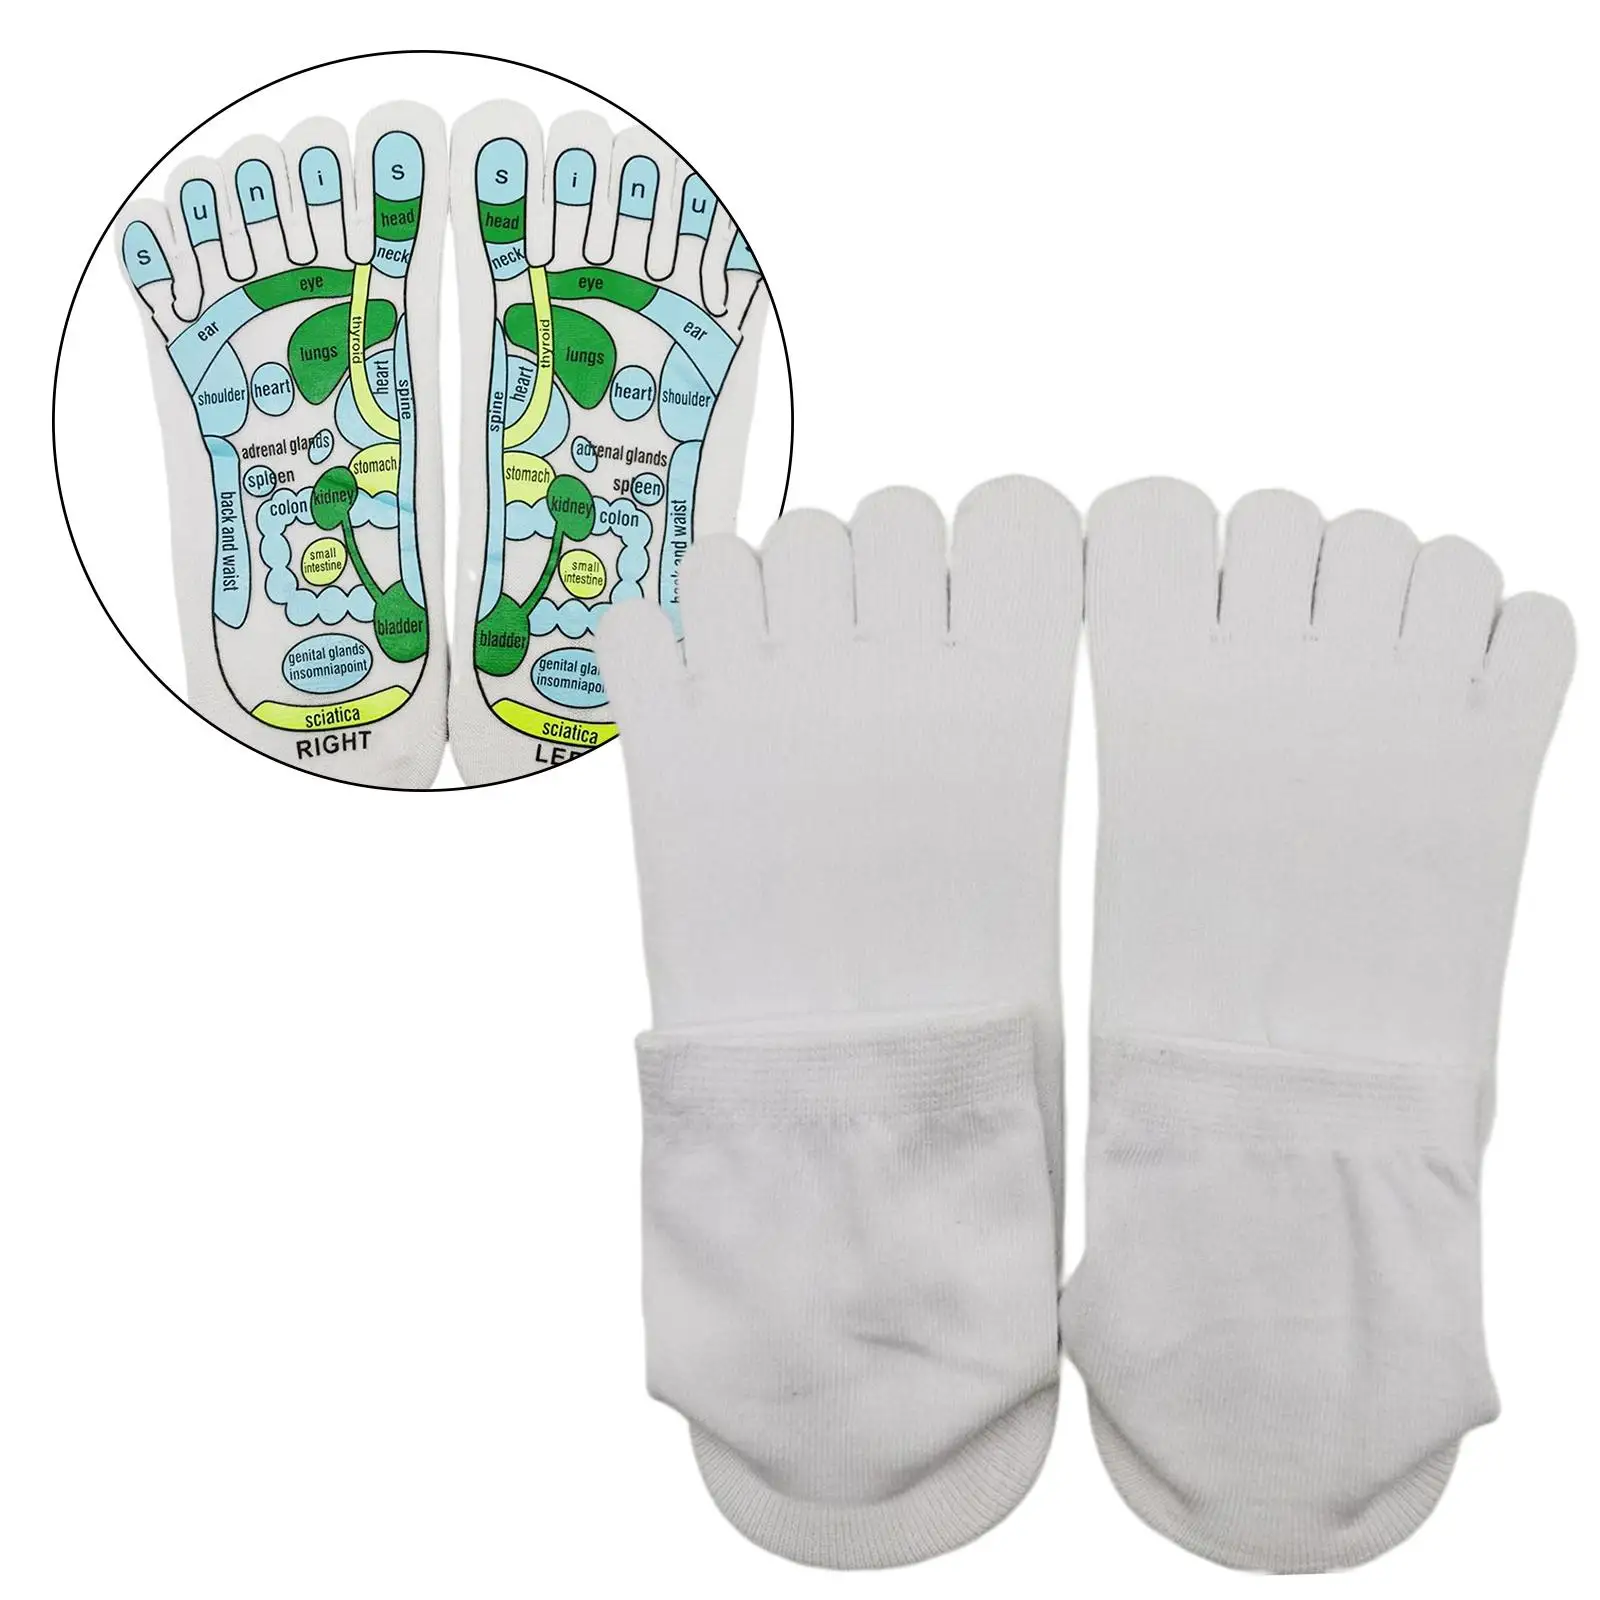 1 Pair Foot Massage with Stick Non-Skid Physiotherapy Physical Relieve Tools Acupressure Reflexology Socks for Yoga Unisex